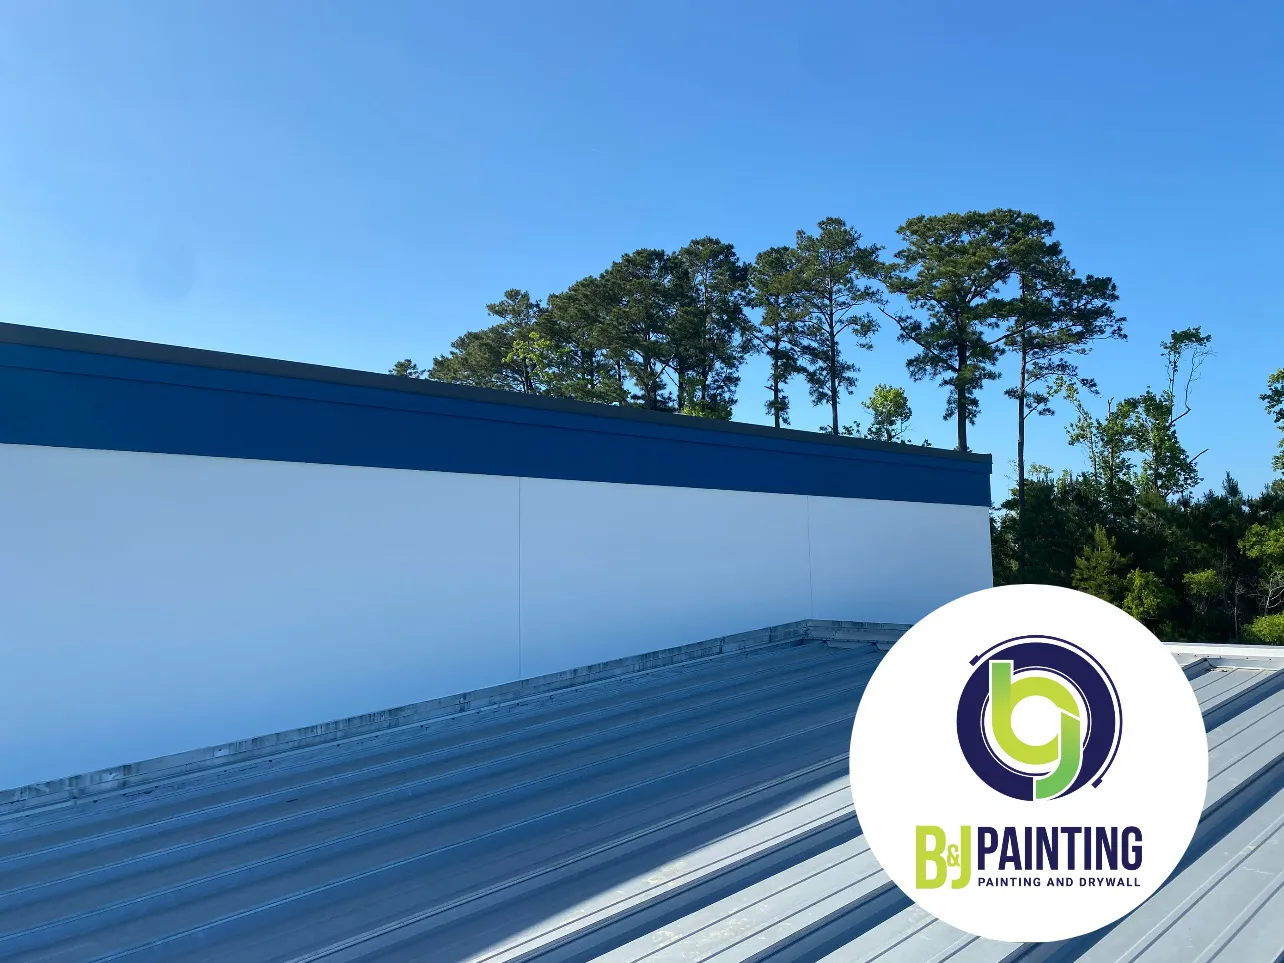 Drywall and Plastering for B&J Painting LLC in Myrtle Beach, SC